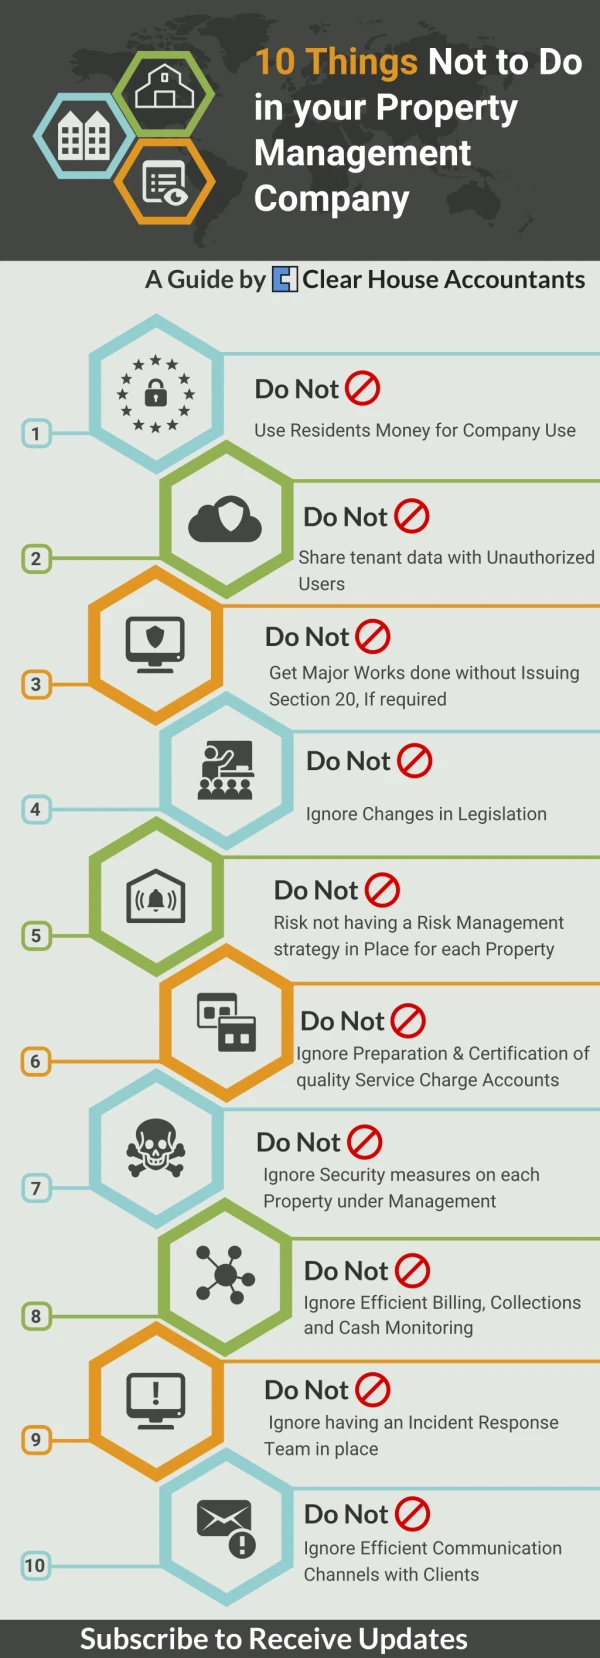 10 Things Not to Do in your Property Management Company